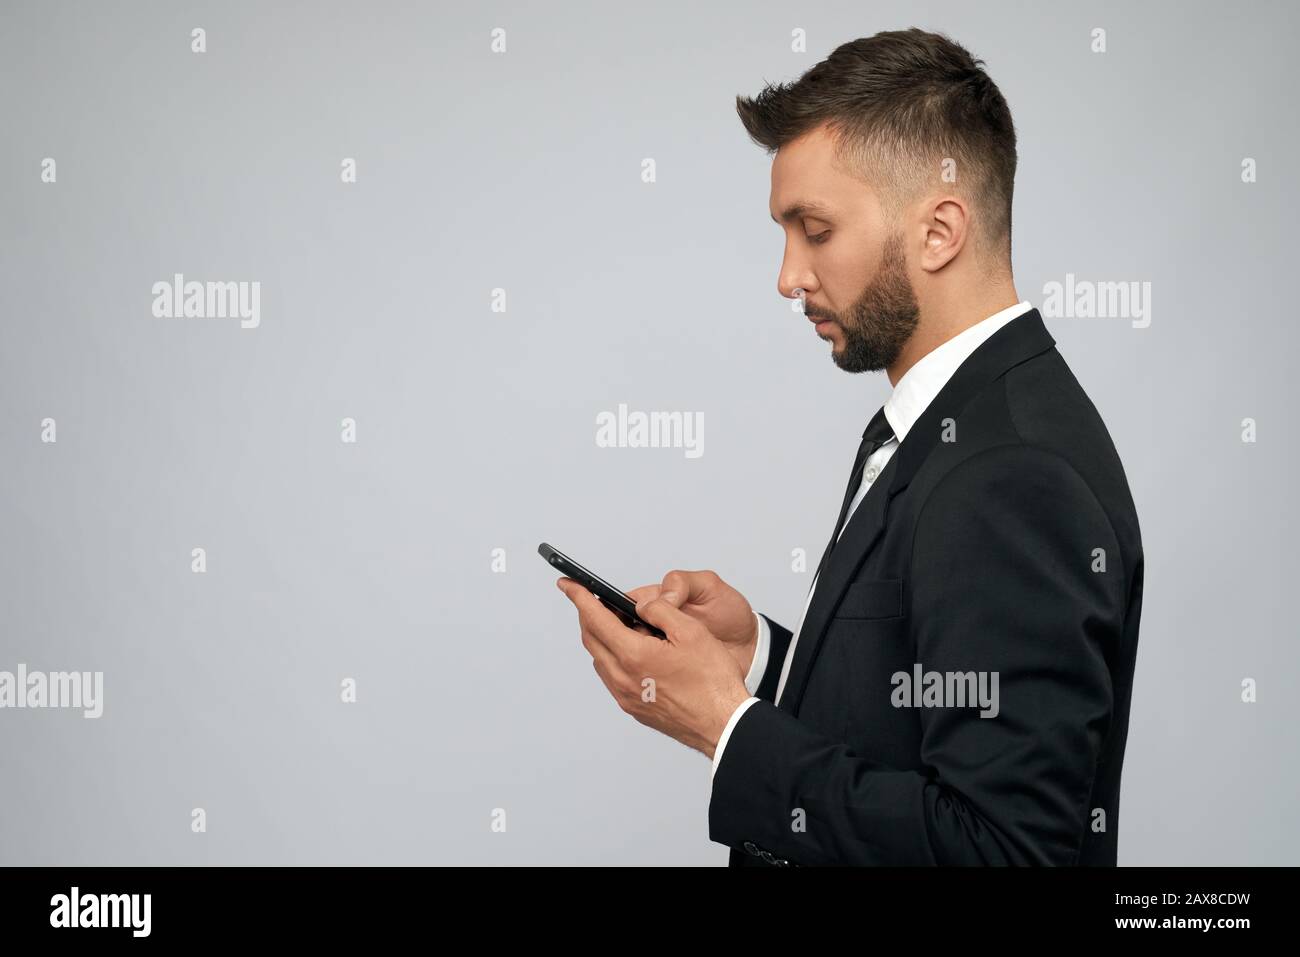 https://c8.alamy.com/comp/2AX8CDW/side-view-of-young-brunette-businessman-in-black-formal-suit-typing-on-smartphone-in-office-handsome-serious-bearded-man-working-using-gadget-isolated-on-grey-concept-of-gadgets-business-2AX8CDW.jpg